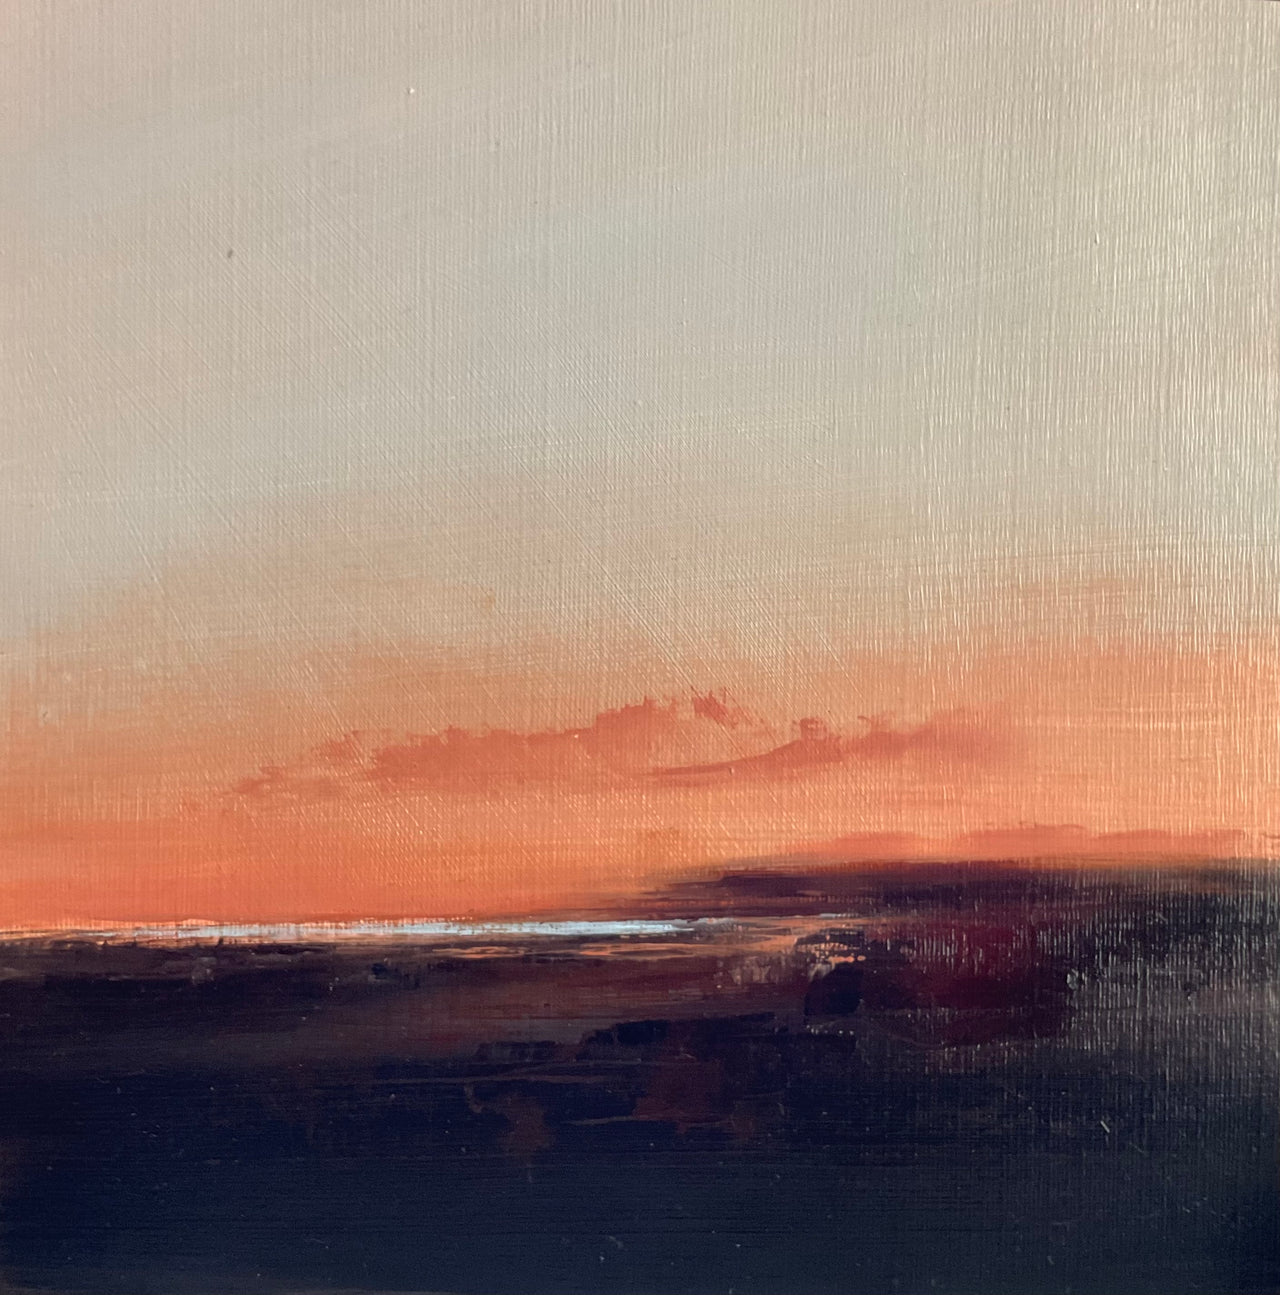 Dark headland with shimmering sea and dusk pink tone sky by artist Nicola Mosley